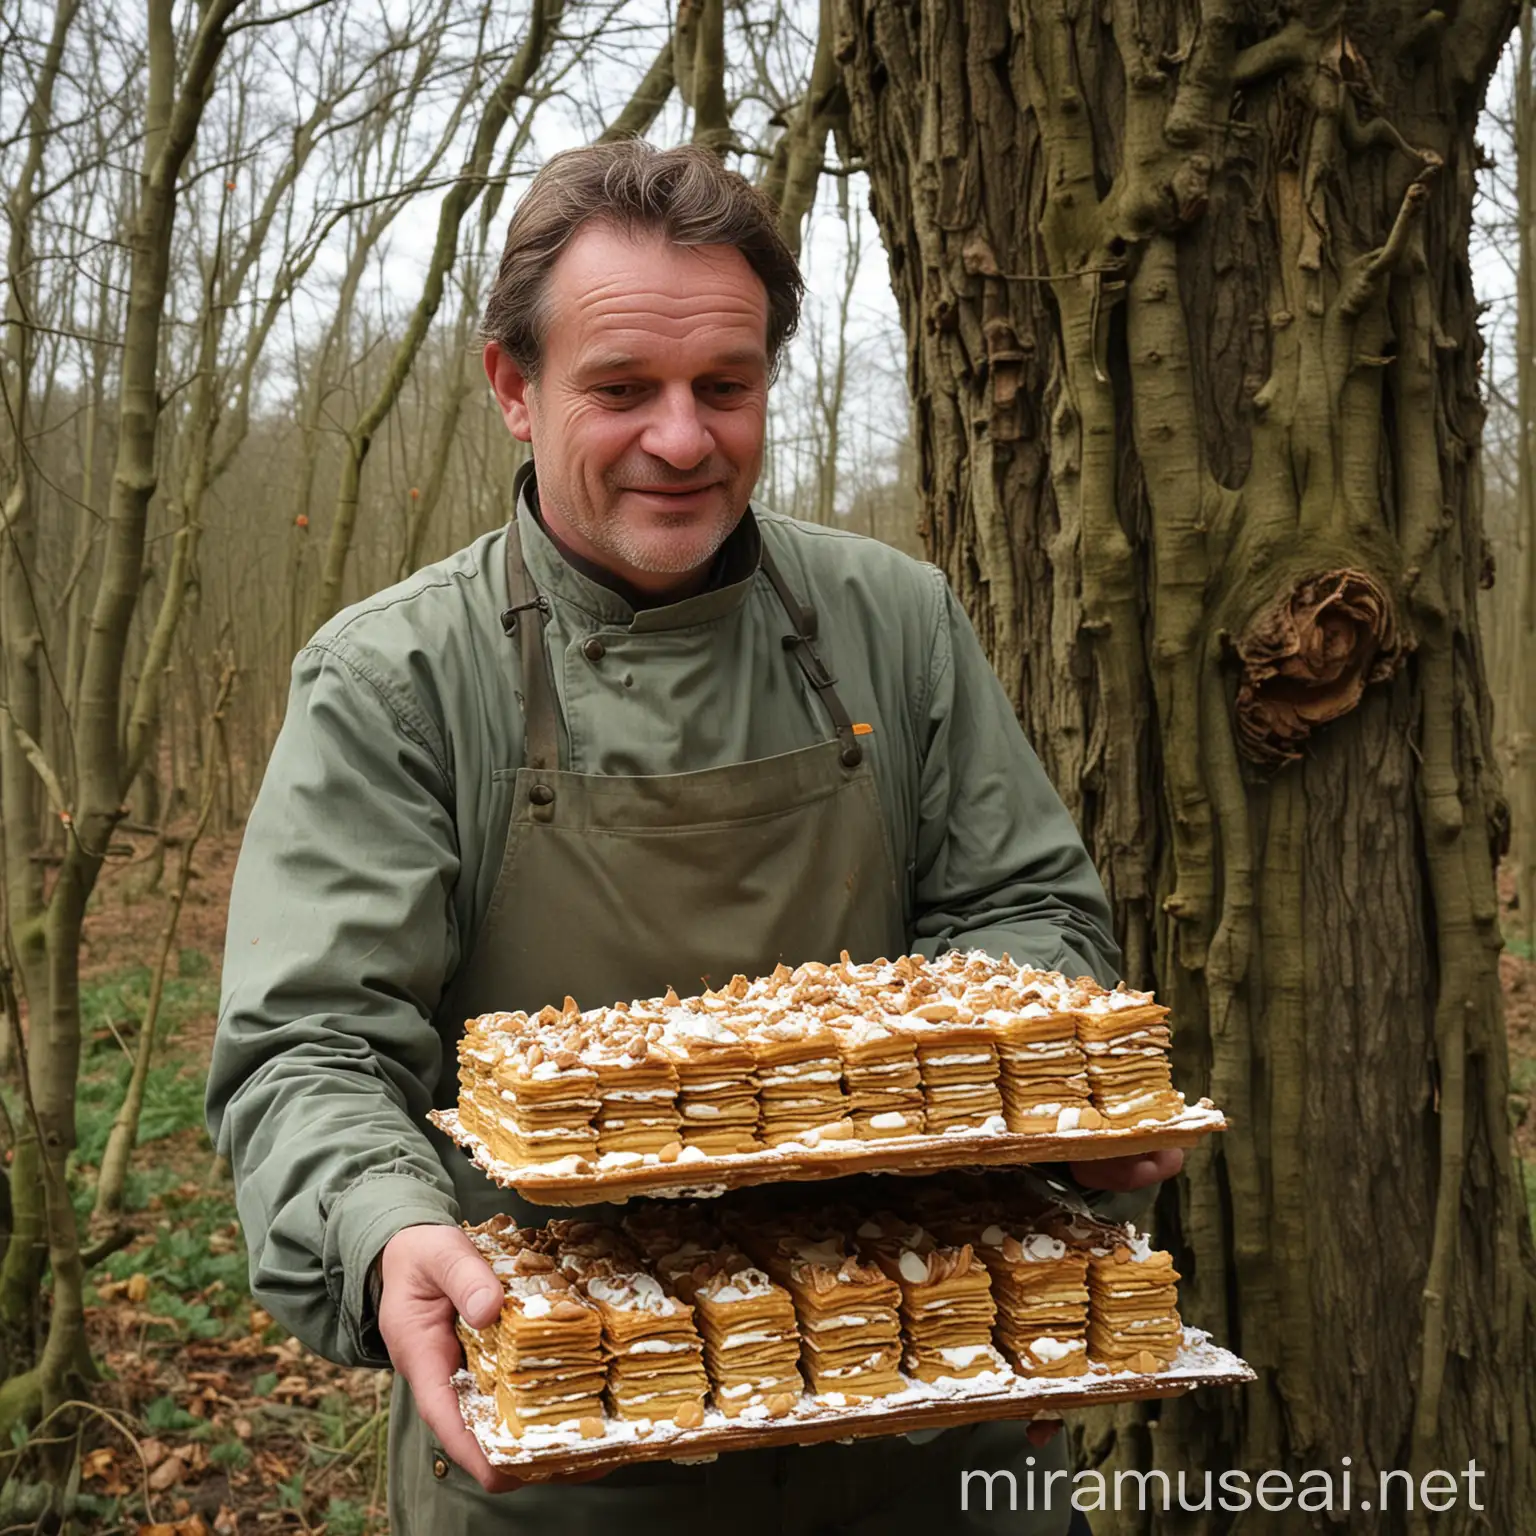 Man Harvesting Millefeuille Cakes From Tree